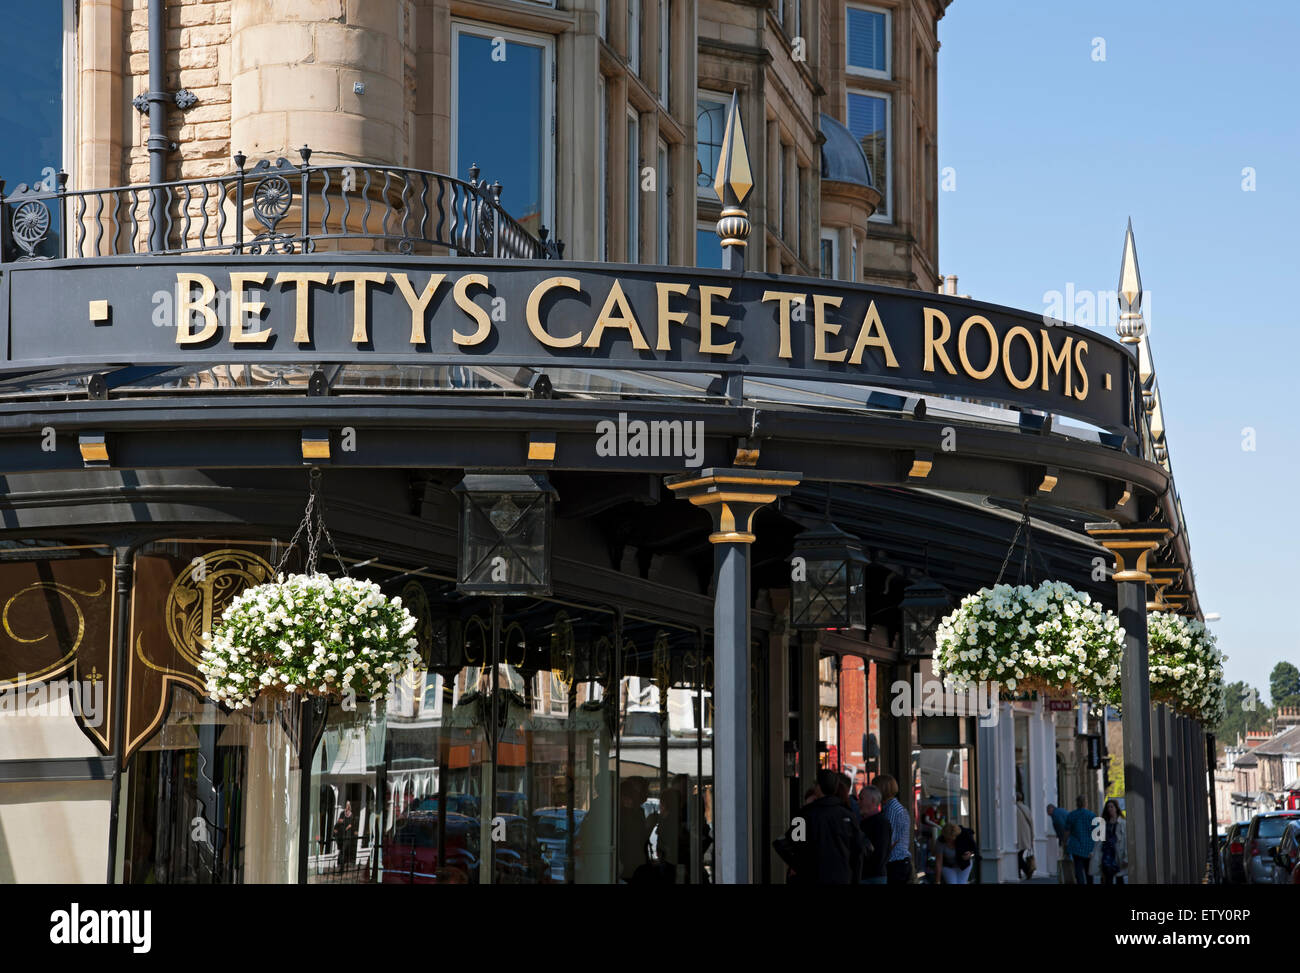 Bettys cafe restaurant and tea rooms exterior in spring Harrogate North Yorkshire England UK United Kingdom GB Great Britain Stock Photo